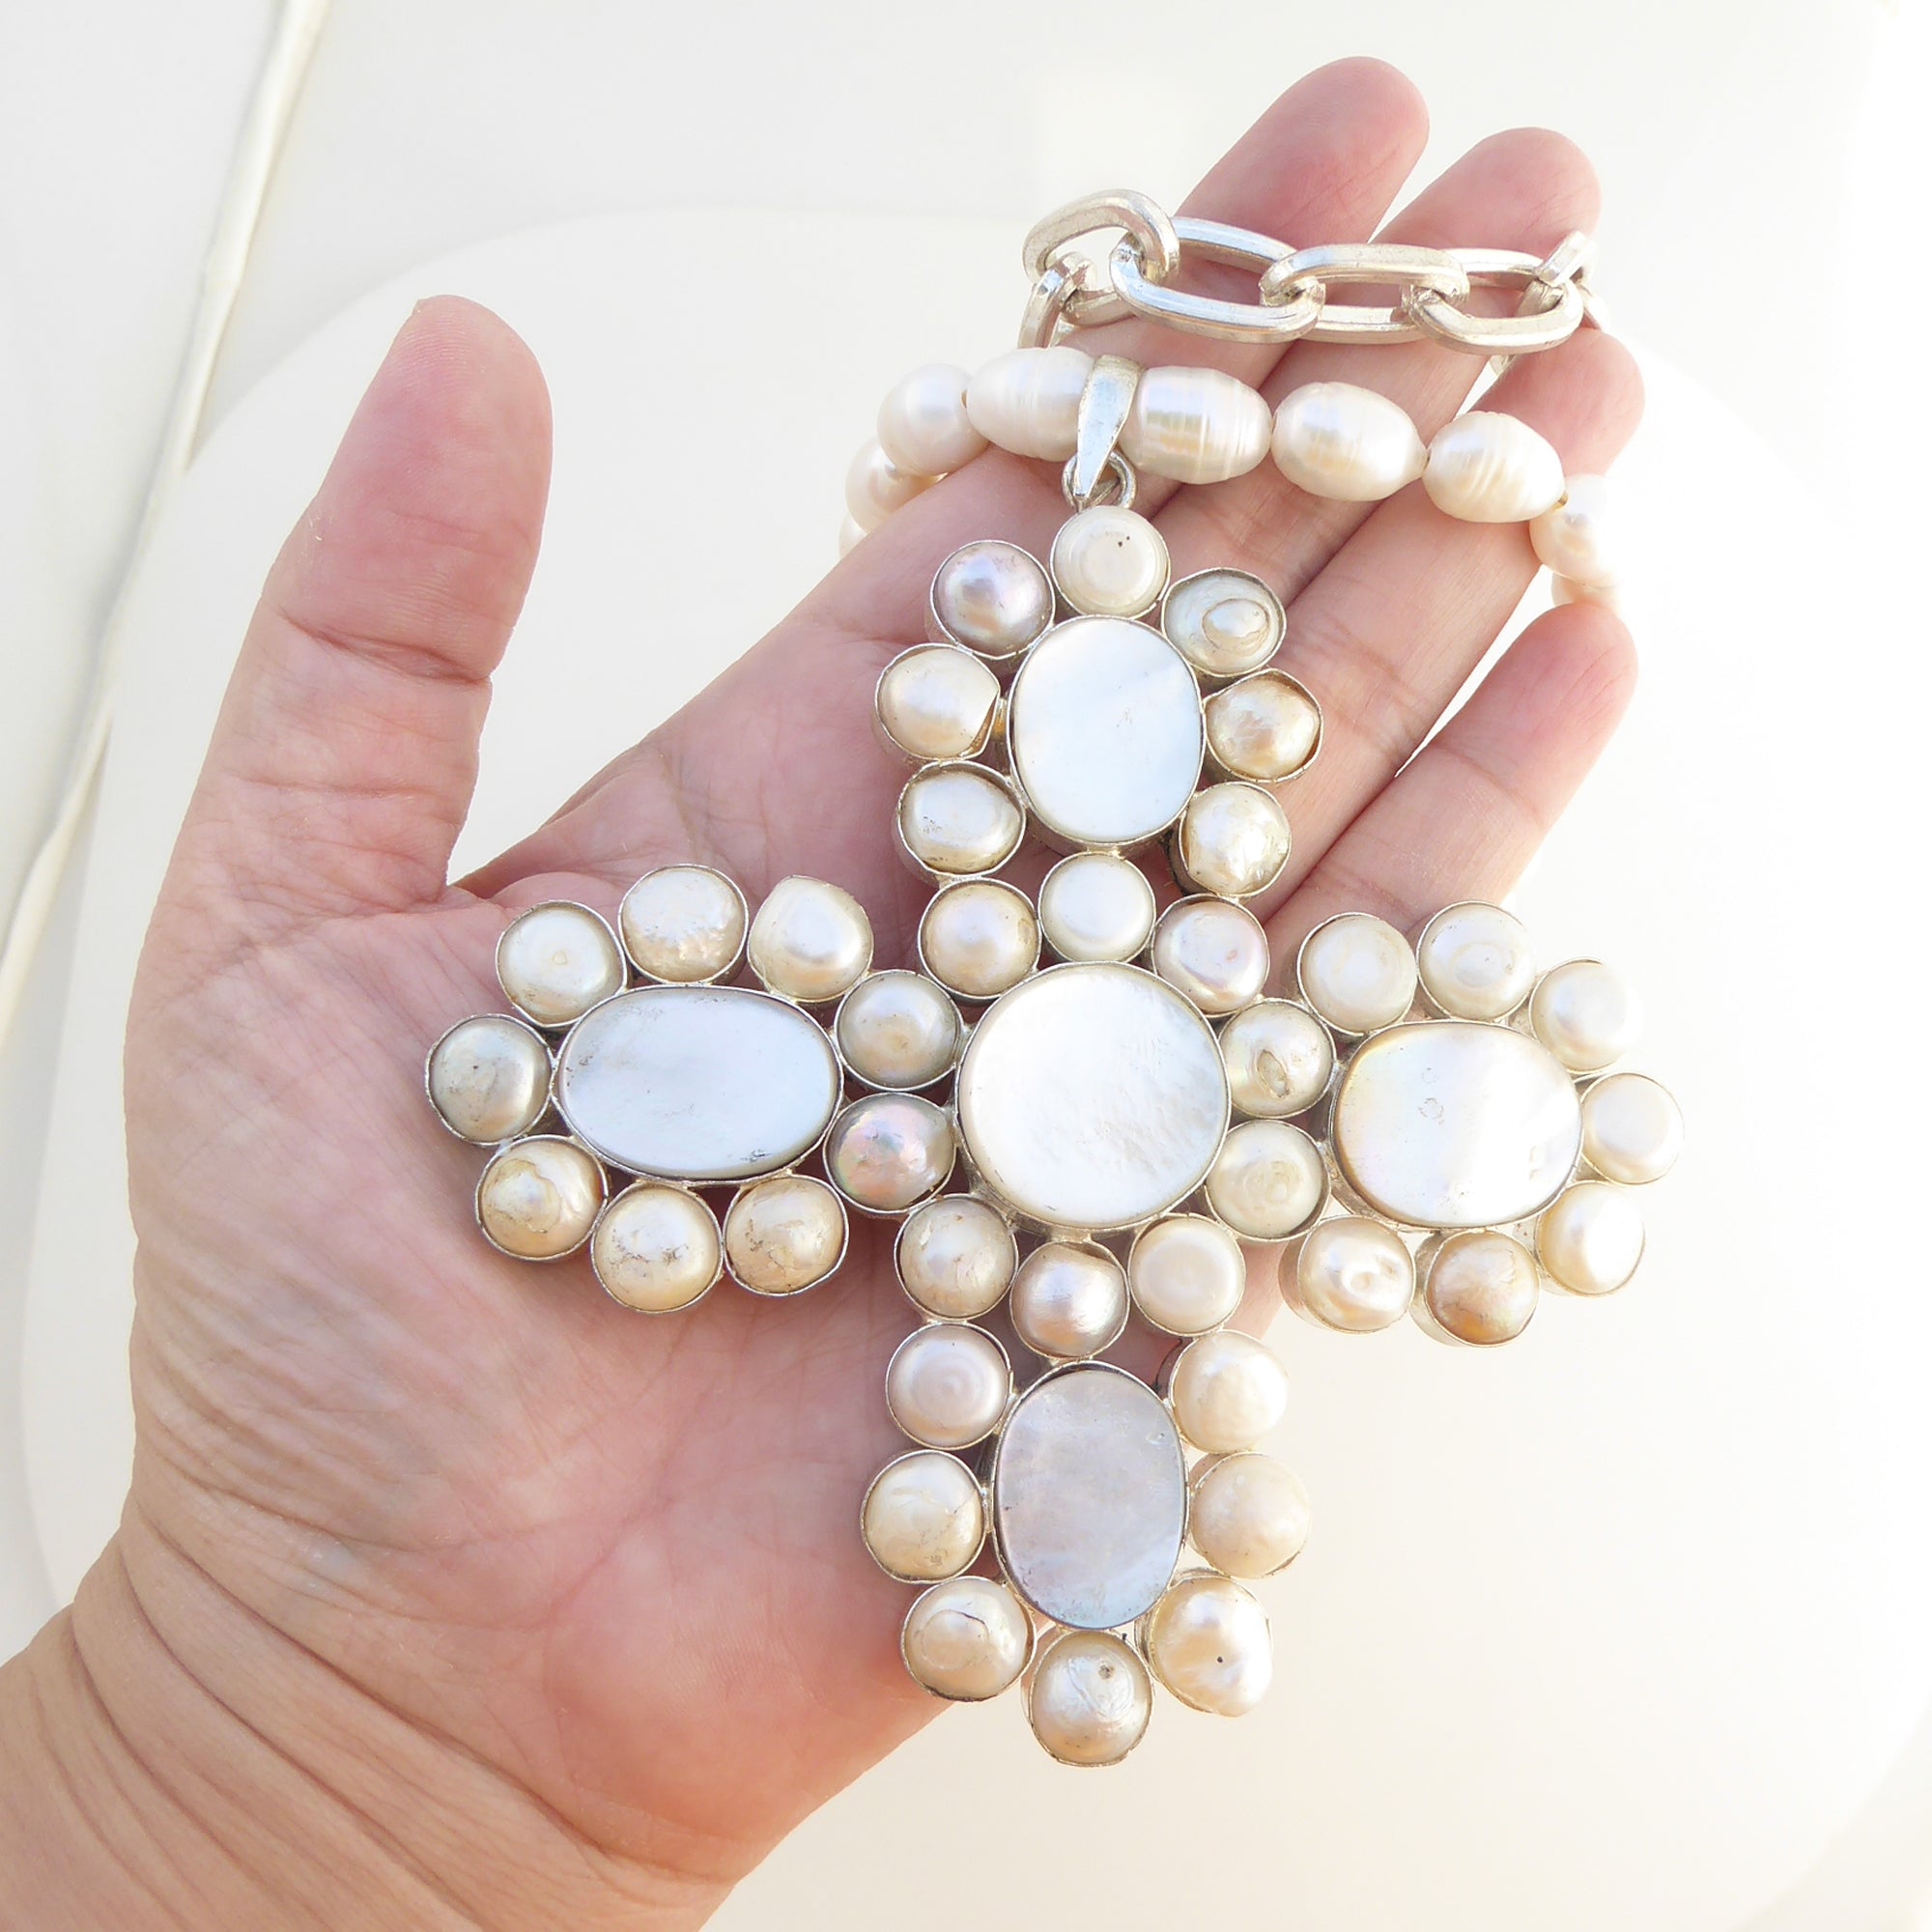 Pearl cross pendant necklace by Jenny Dayco 7